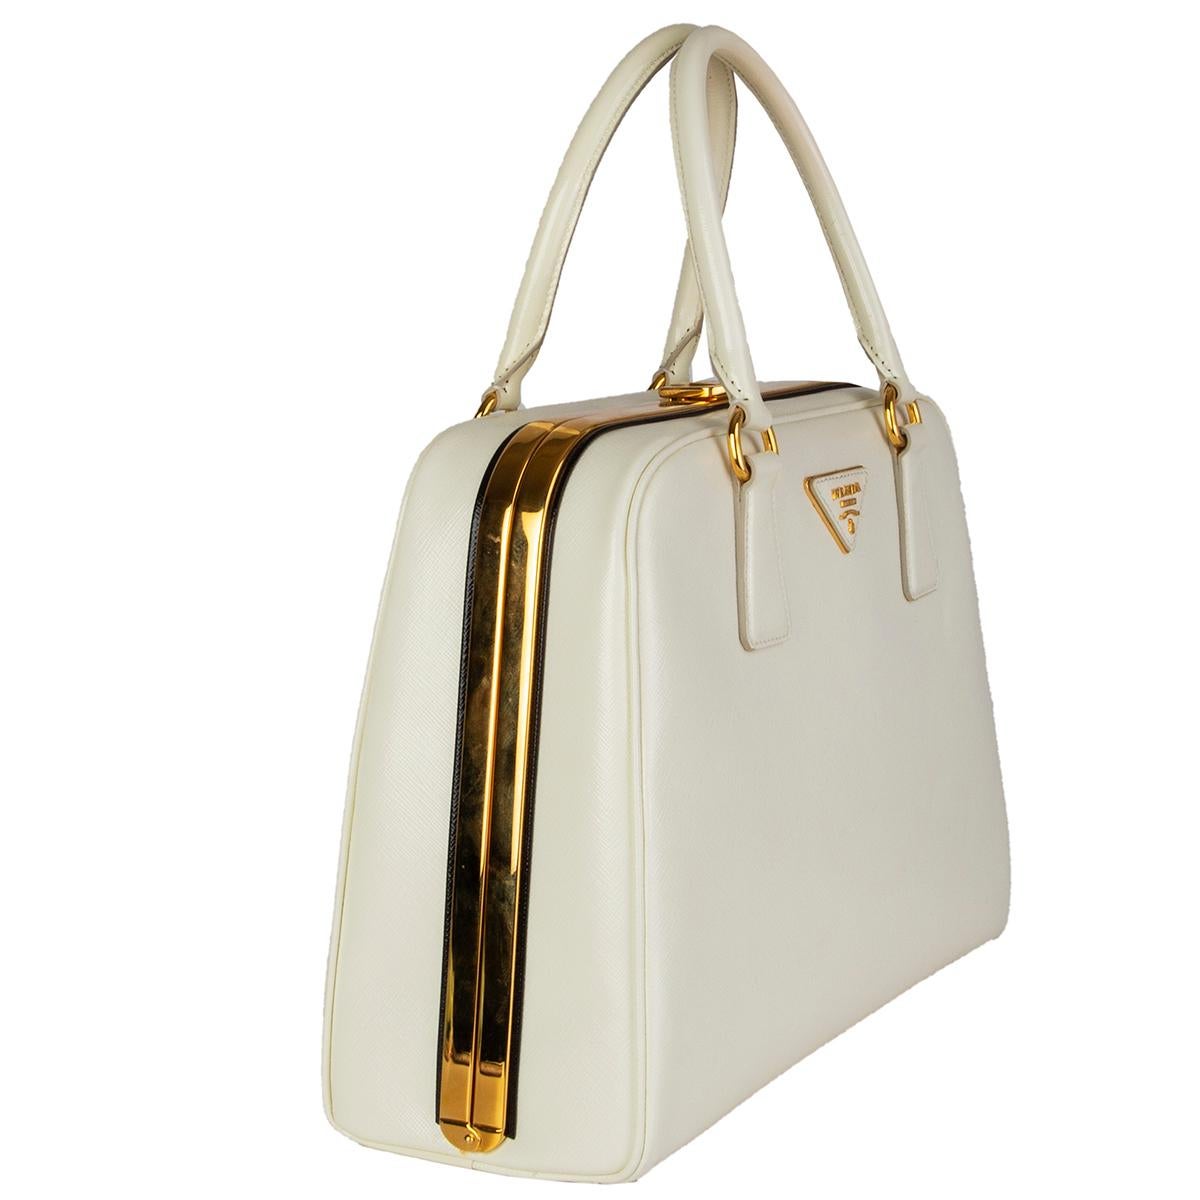 Prada 'Larice BL808F' handbag in ivory  Saffiano Vernic leather with black trim featuring gold-tone hardware. Opens with a spring hinge closure frame top. The interior is lined in nude smooth leather with two large zip pockets and three open